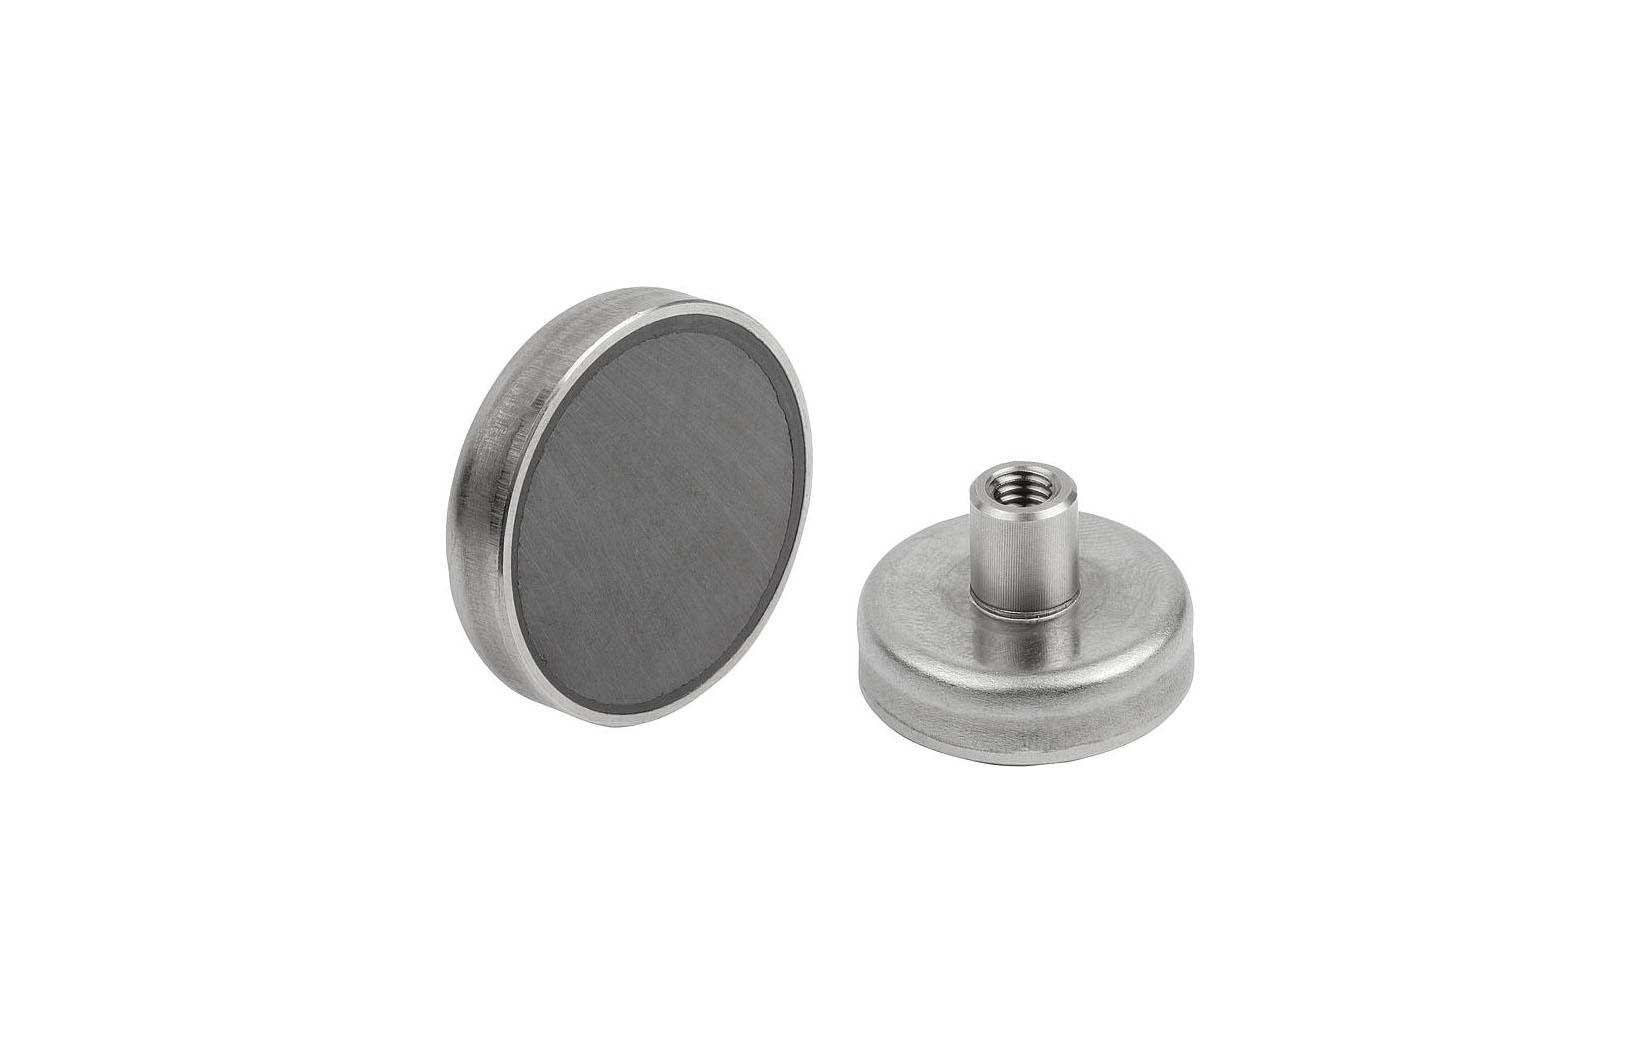 K1400_Shallow pot magnets with internal thread hard ferrite with stainlesssteel housing